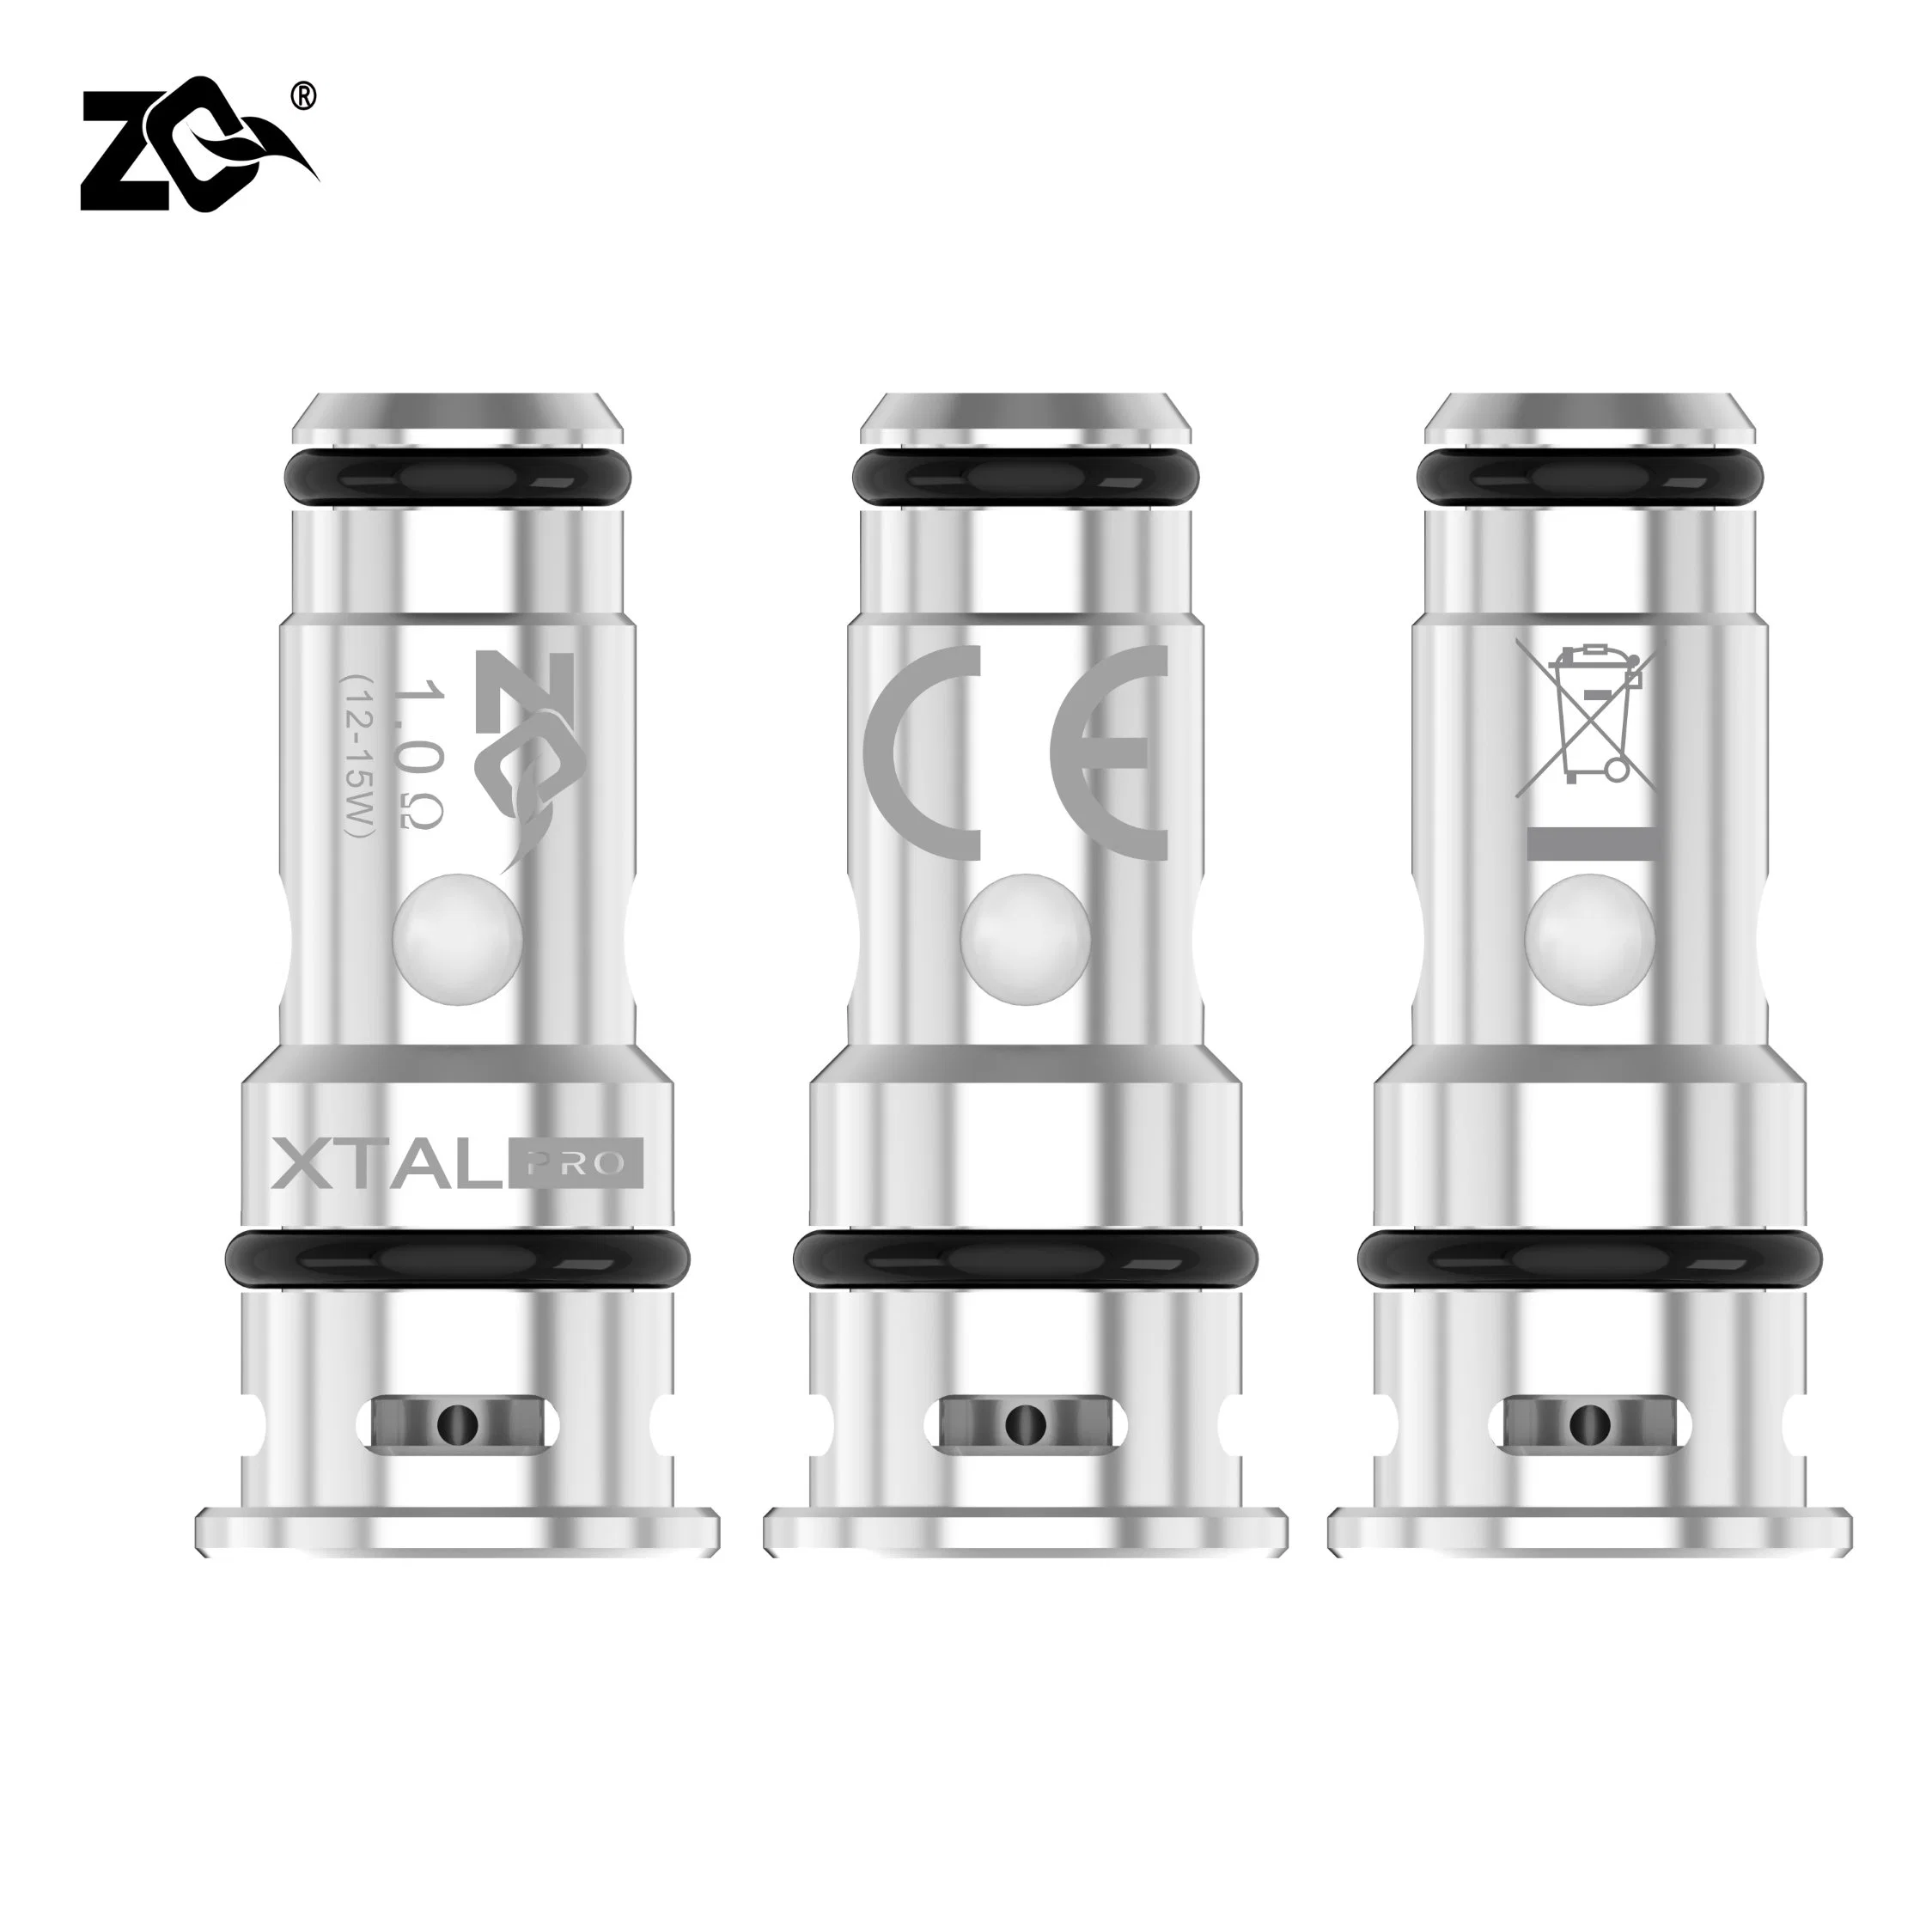 0.6ohm 1.0ohm Zq Xtal PRO Replacement Mesh Coil Electronic Cigarette Atomizer Coil Head Smoking Accessories